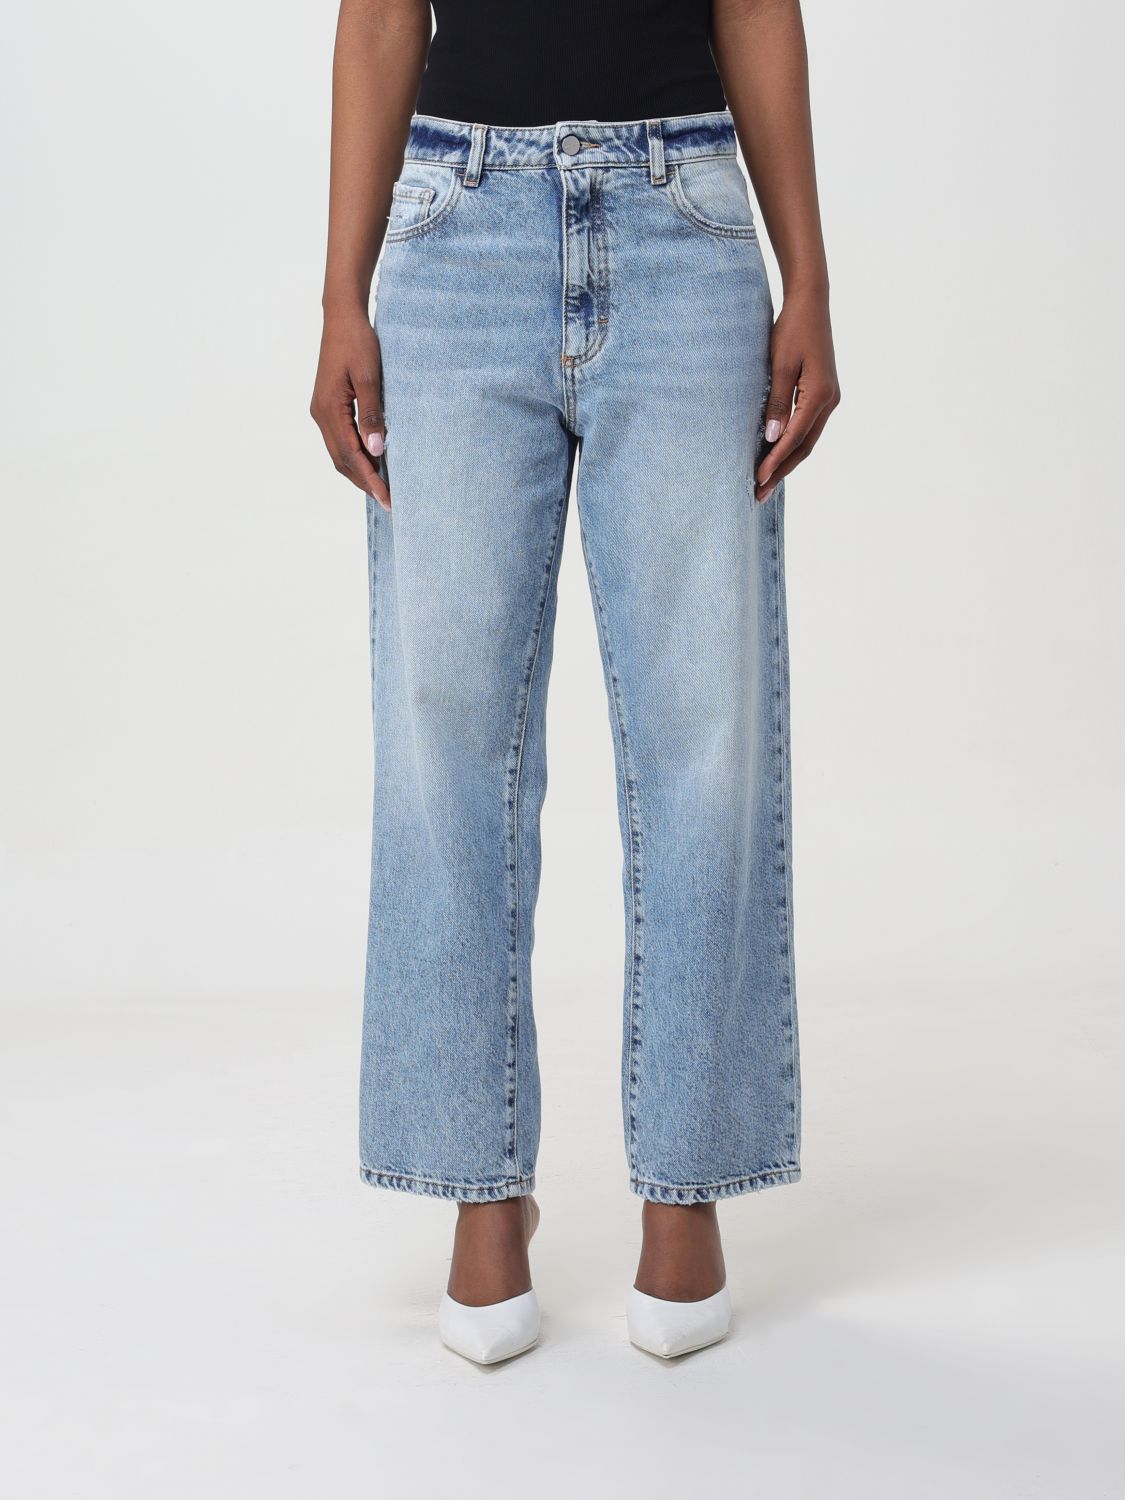 jeans icon denim los angeles woman colour stone washed